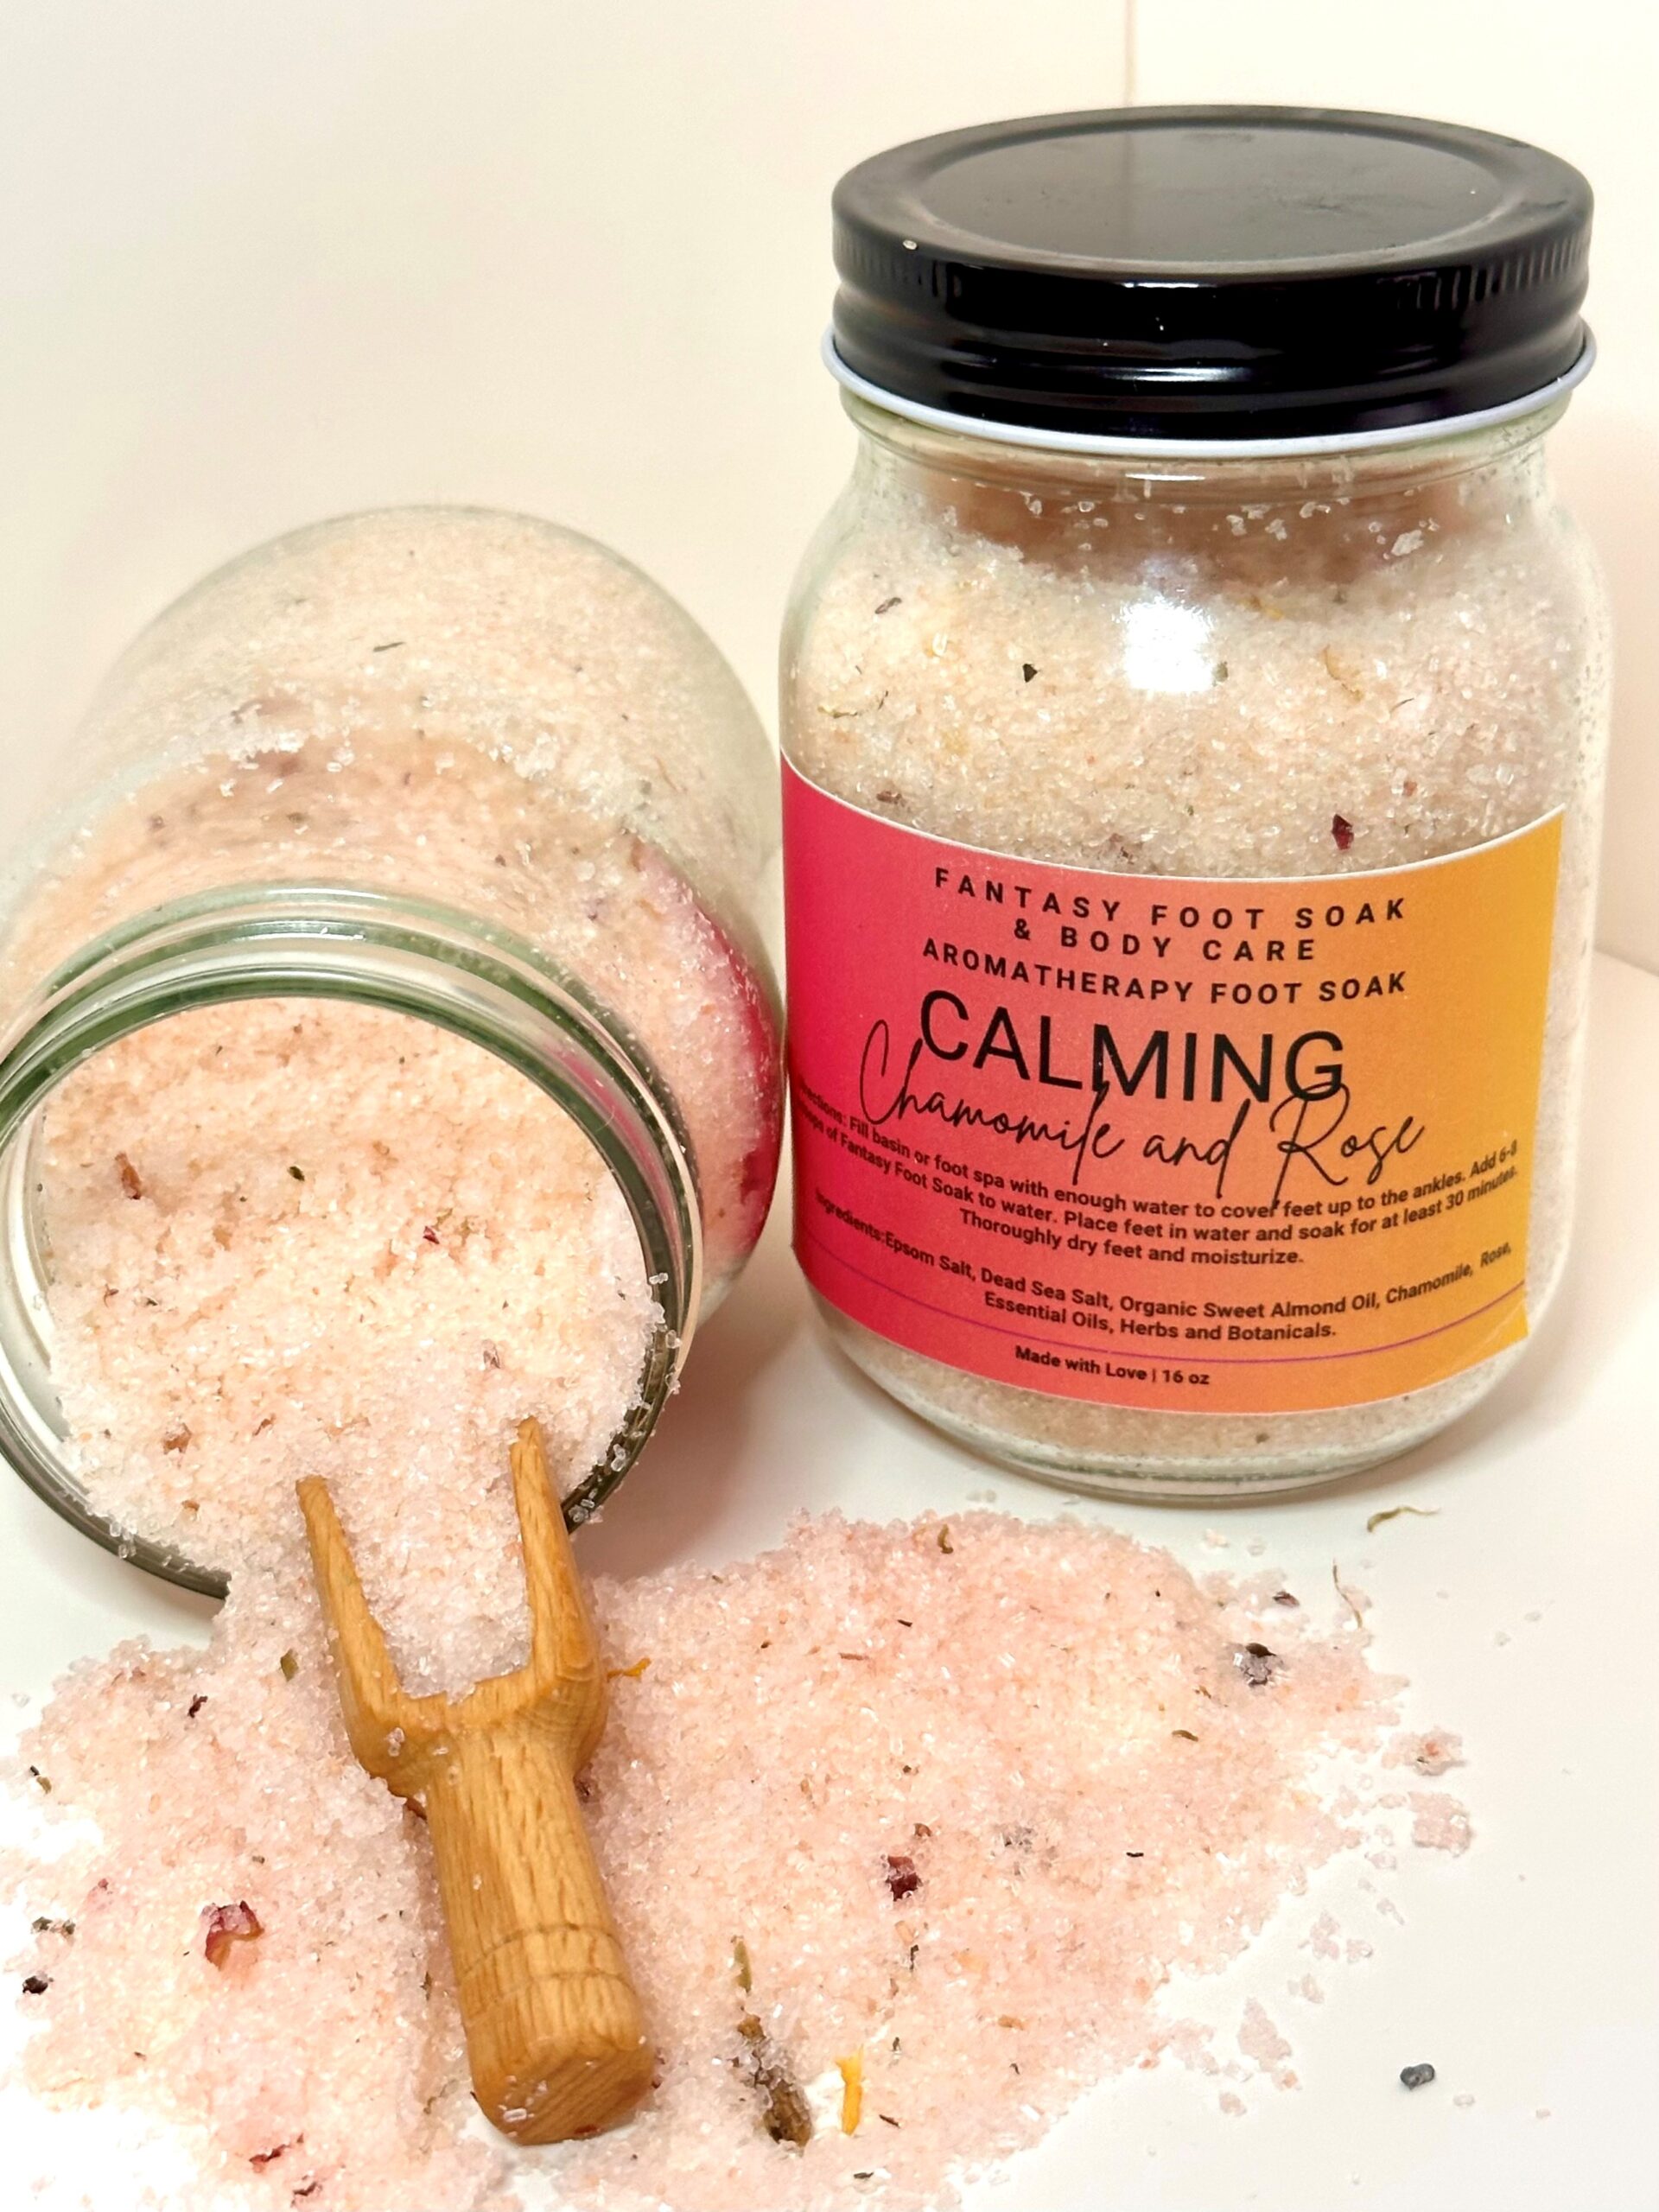 Fantasy Foot Soak & Body Care’s Aromatherapy Foot Soak blend Calming Chamomile and Rose with dried rose petals.